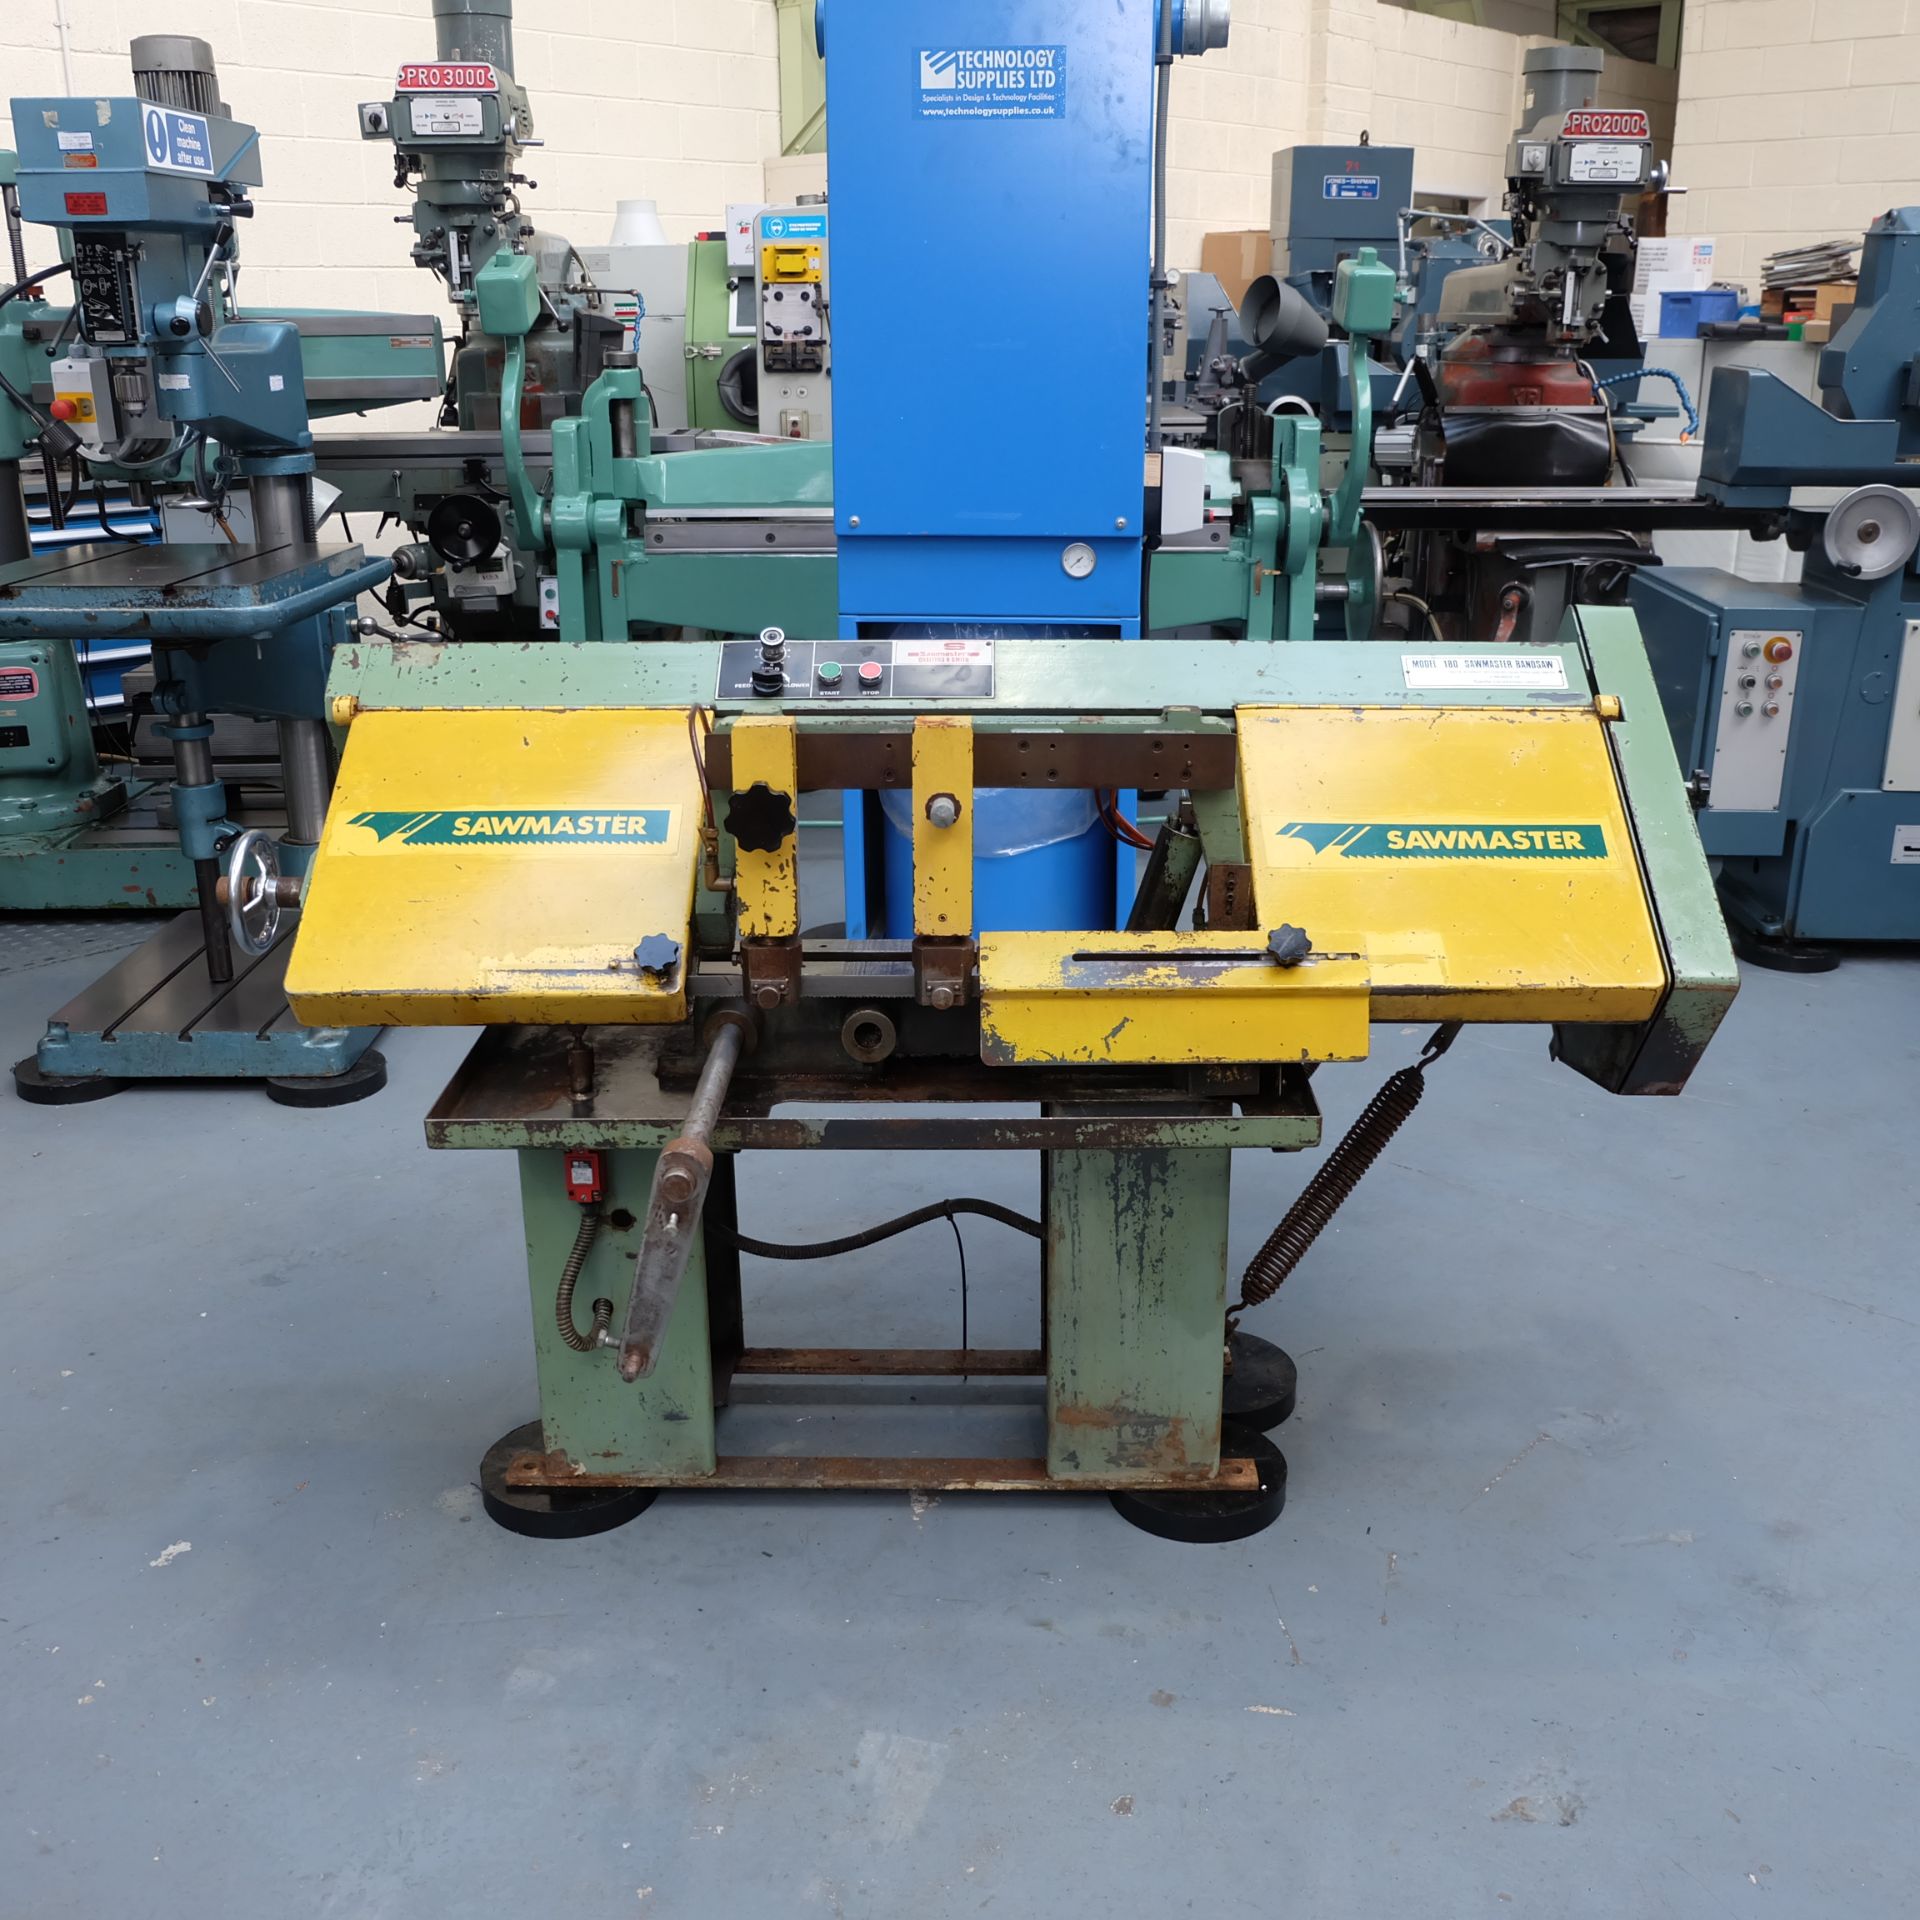 Qualters & Smith Model 180 Sawmaster Horizontal Bandsaw. Capacity Approx 180mm.